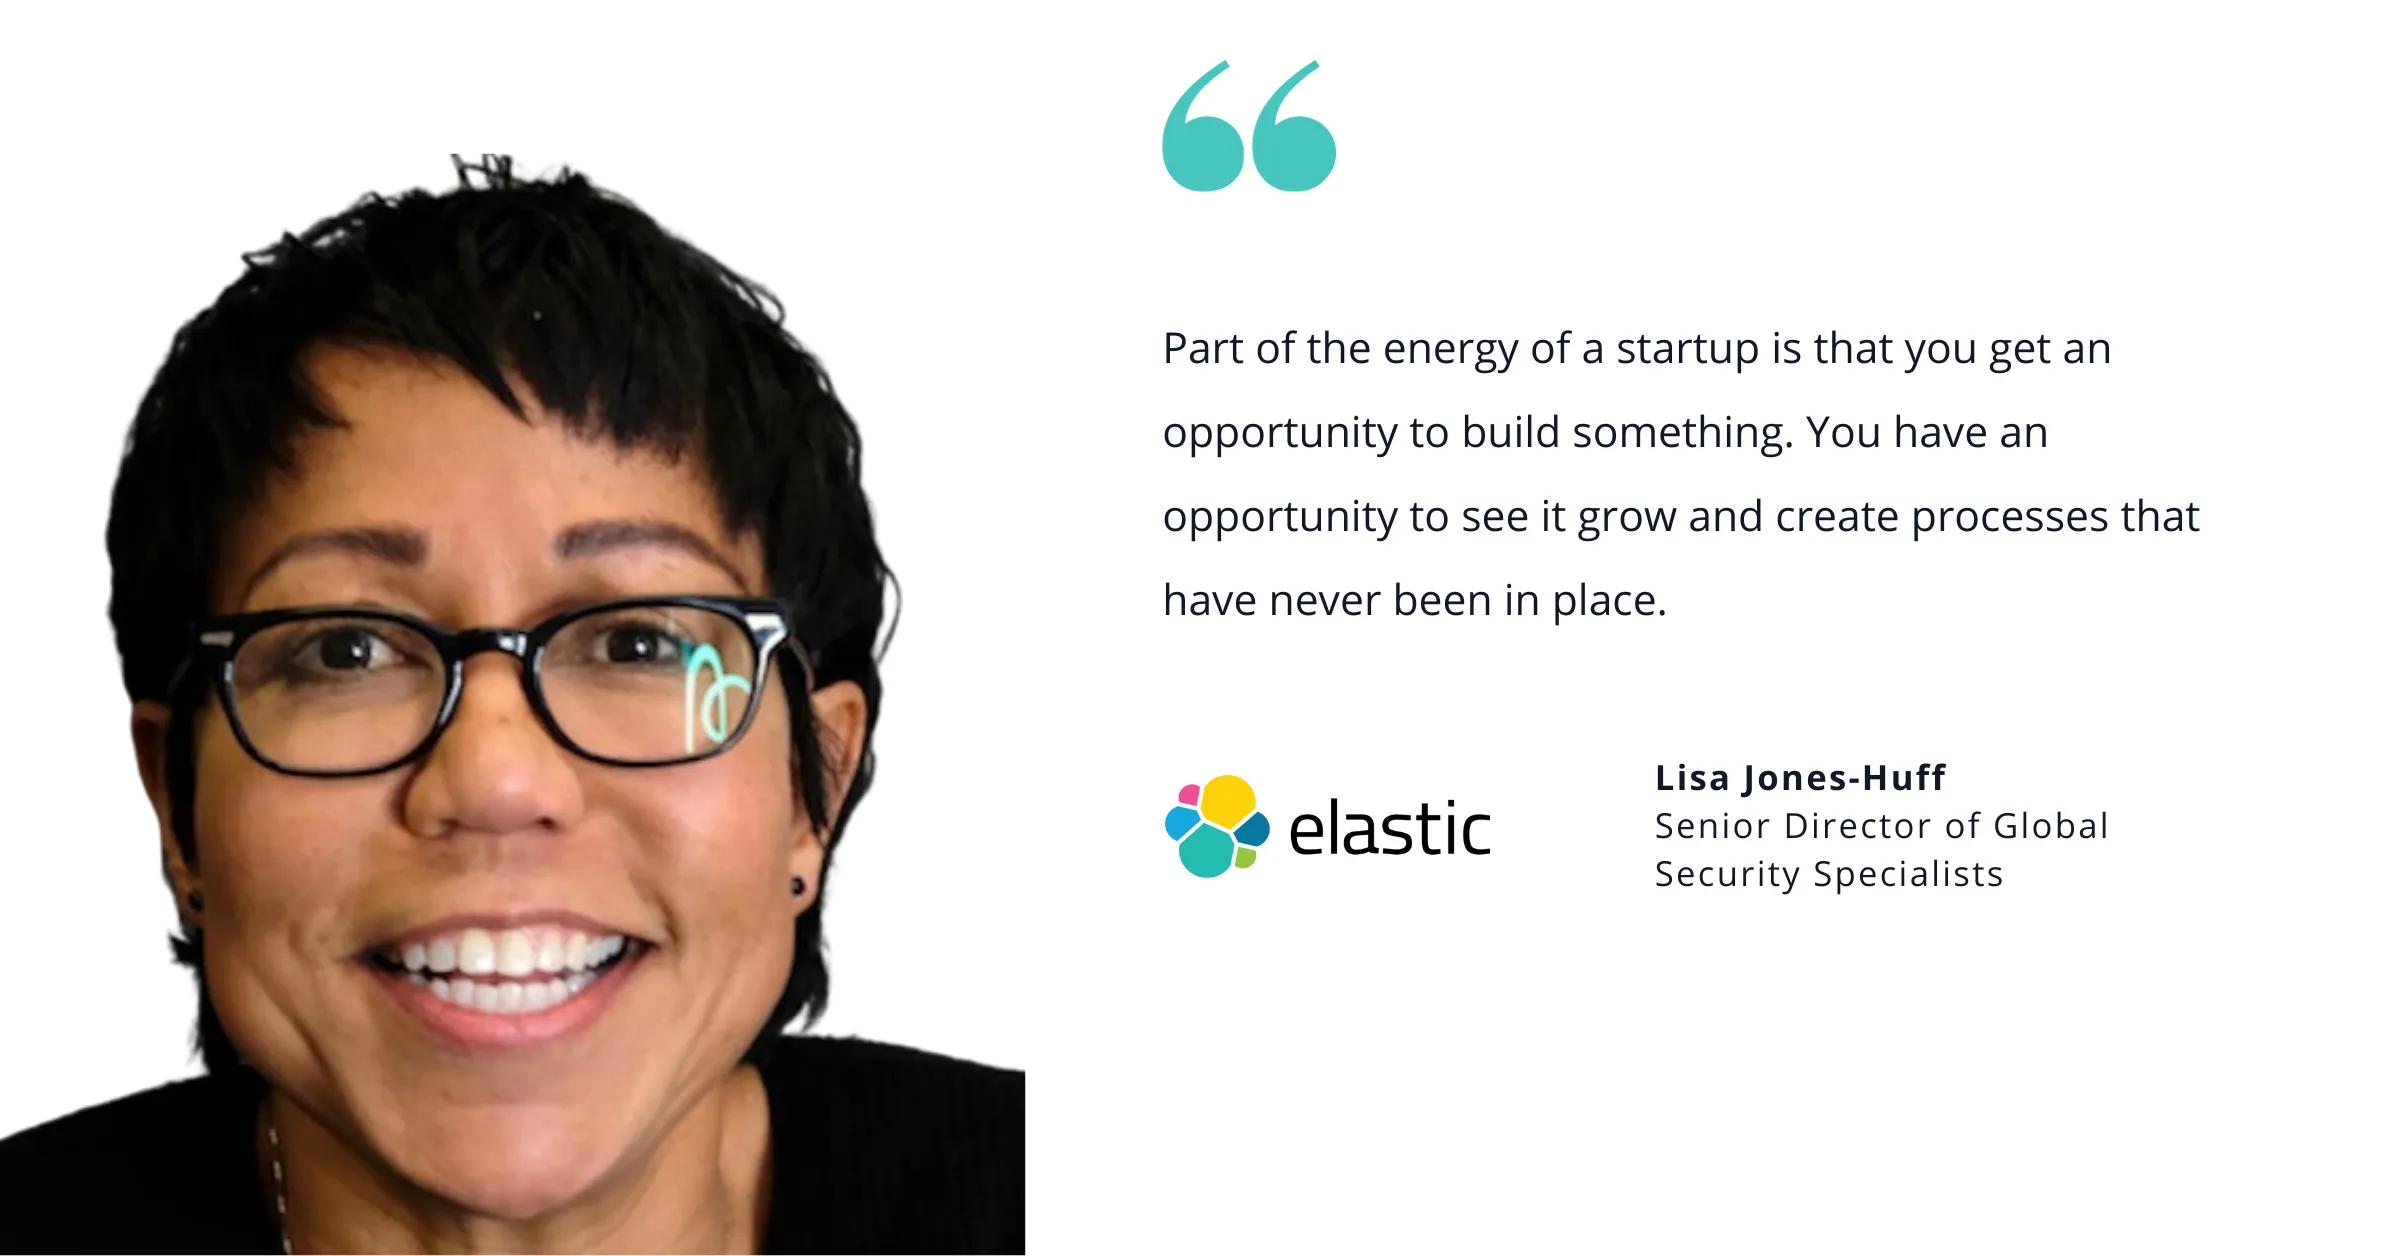 photo-of-lisa-jones-huff-senior-director-of-global-security-specialists-at-elastic-with-quote-saying-part-of-the-energy-of-a.webp